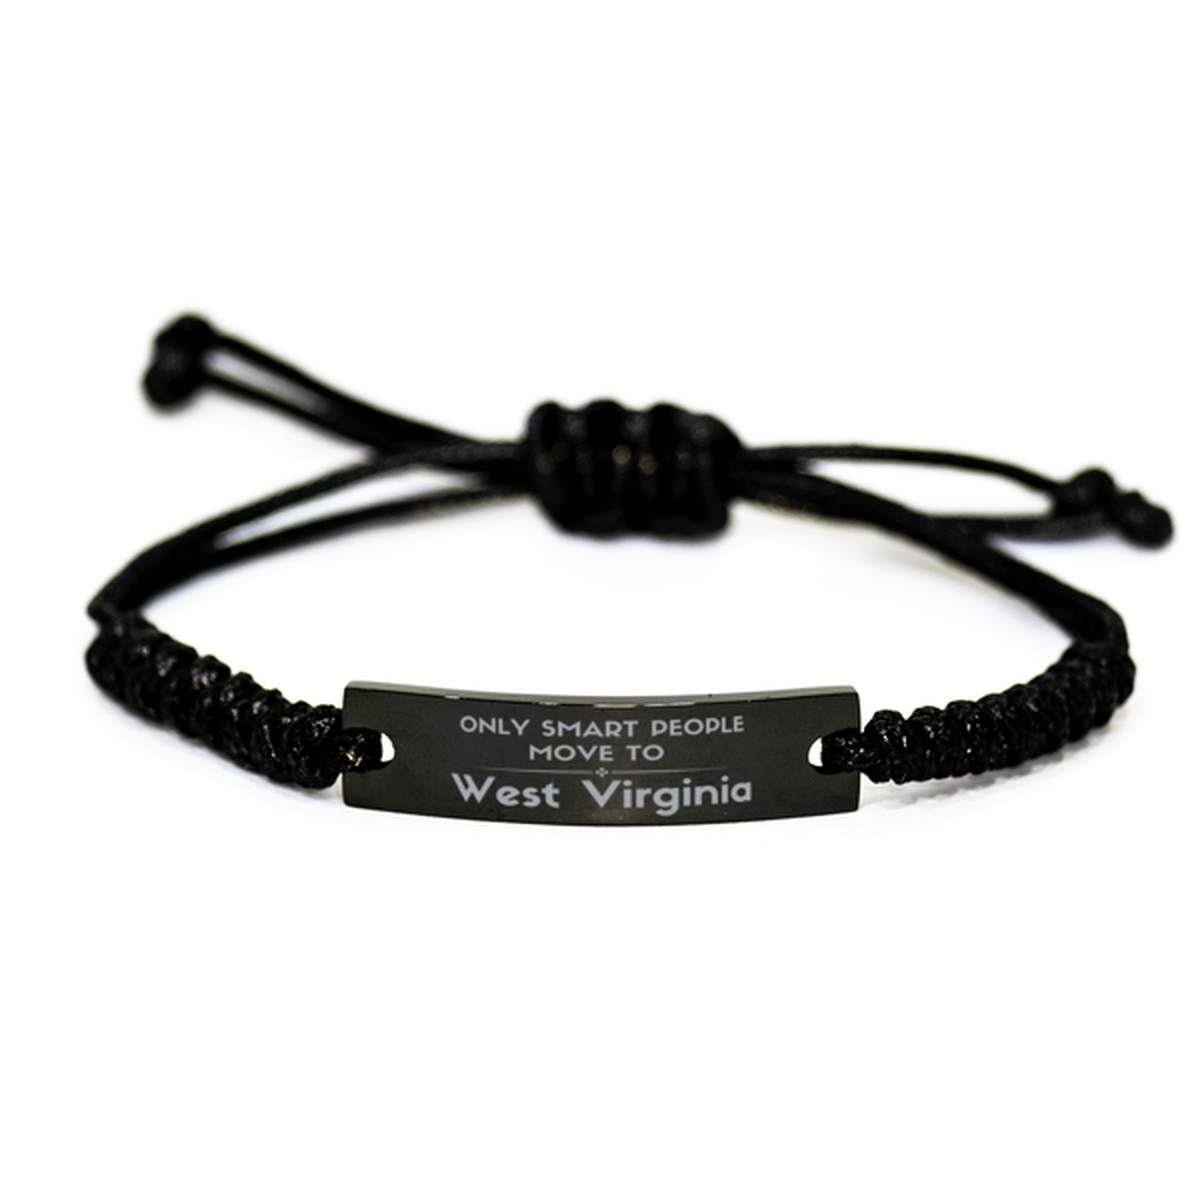 Only smart people move to West Virginia Black Rope Bracelet, Gag Gifts For West Virginia, Move to West Virginia Gifts for Friends Coworker Funny Saying Quote